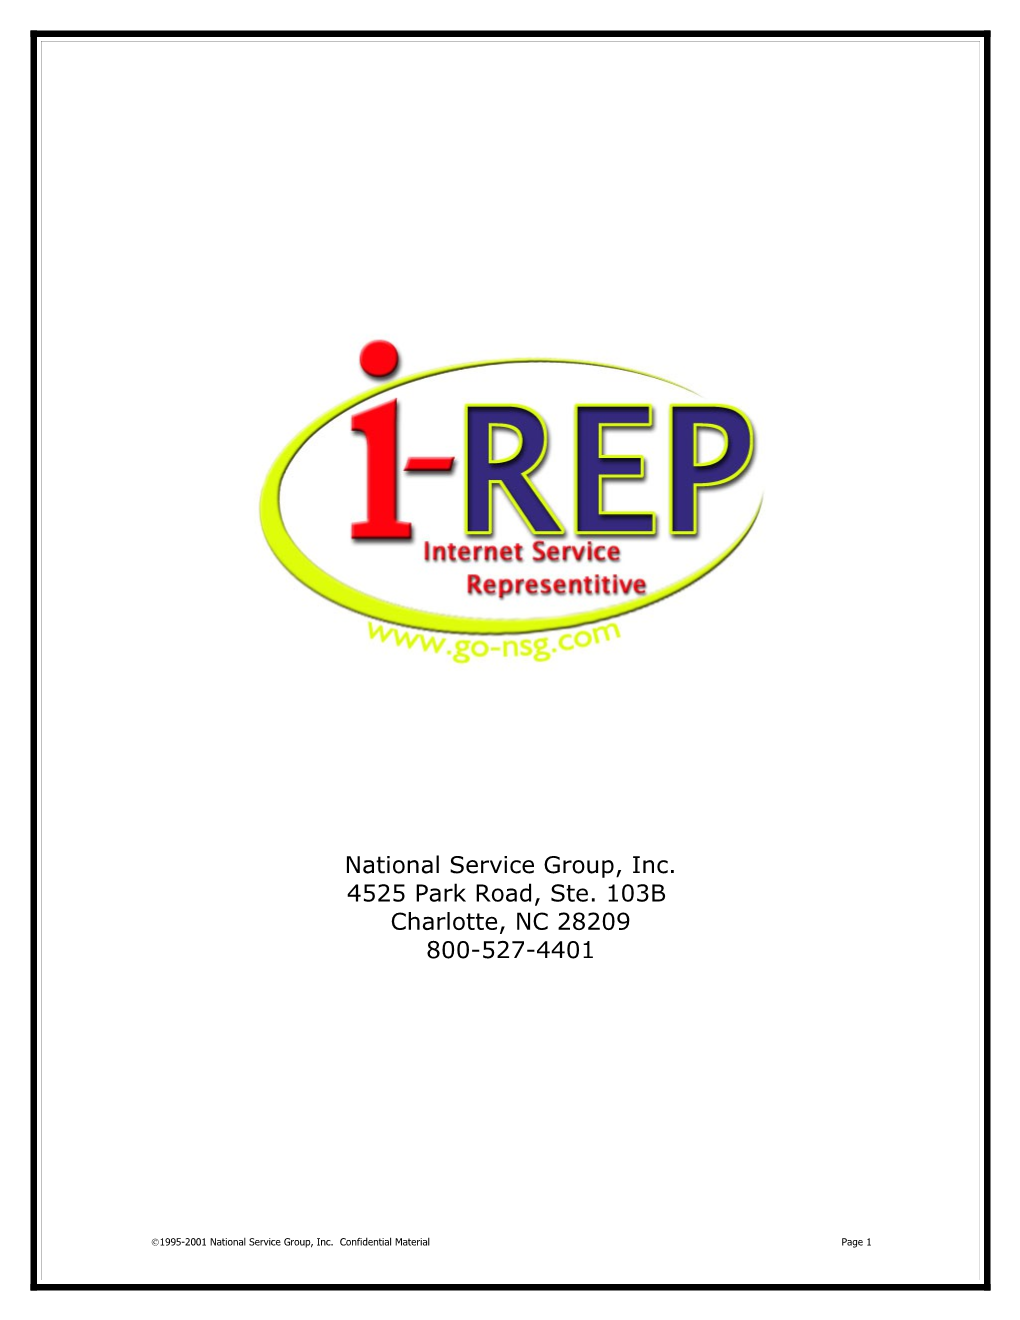 National Service Group, Inc